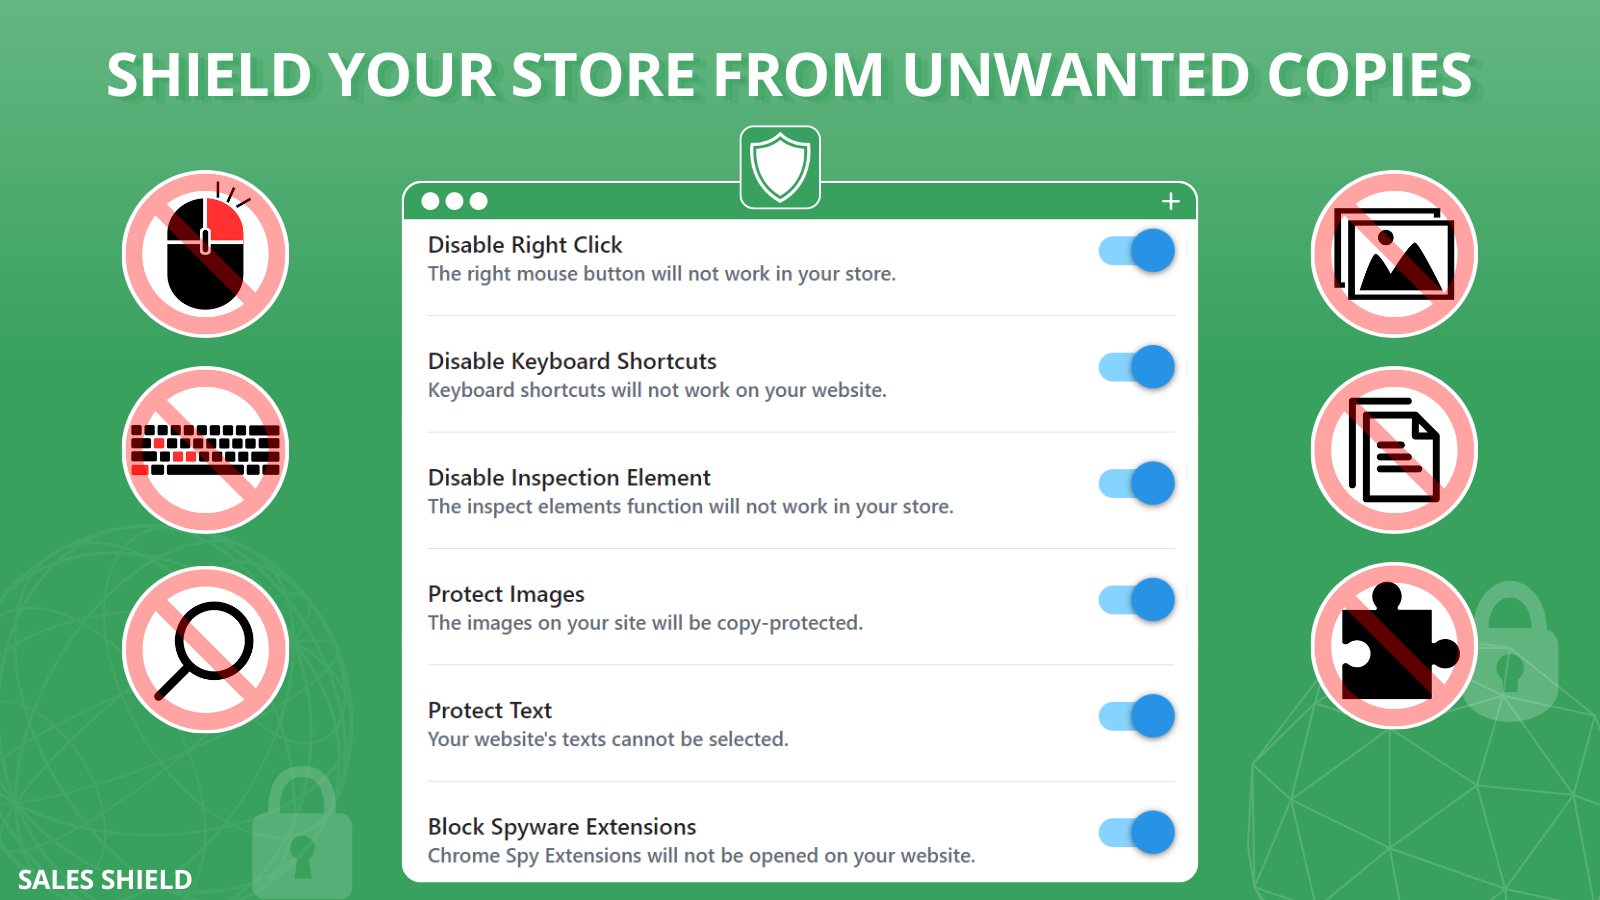 Shield your store from unwanted copies. Active blocking function